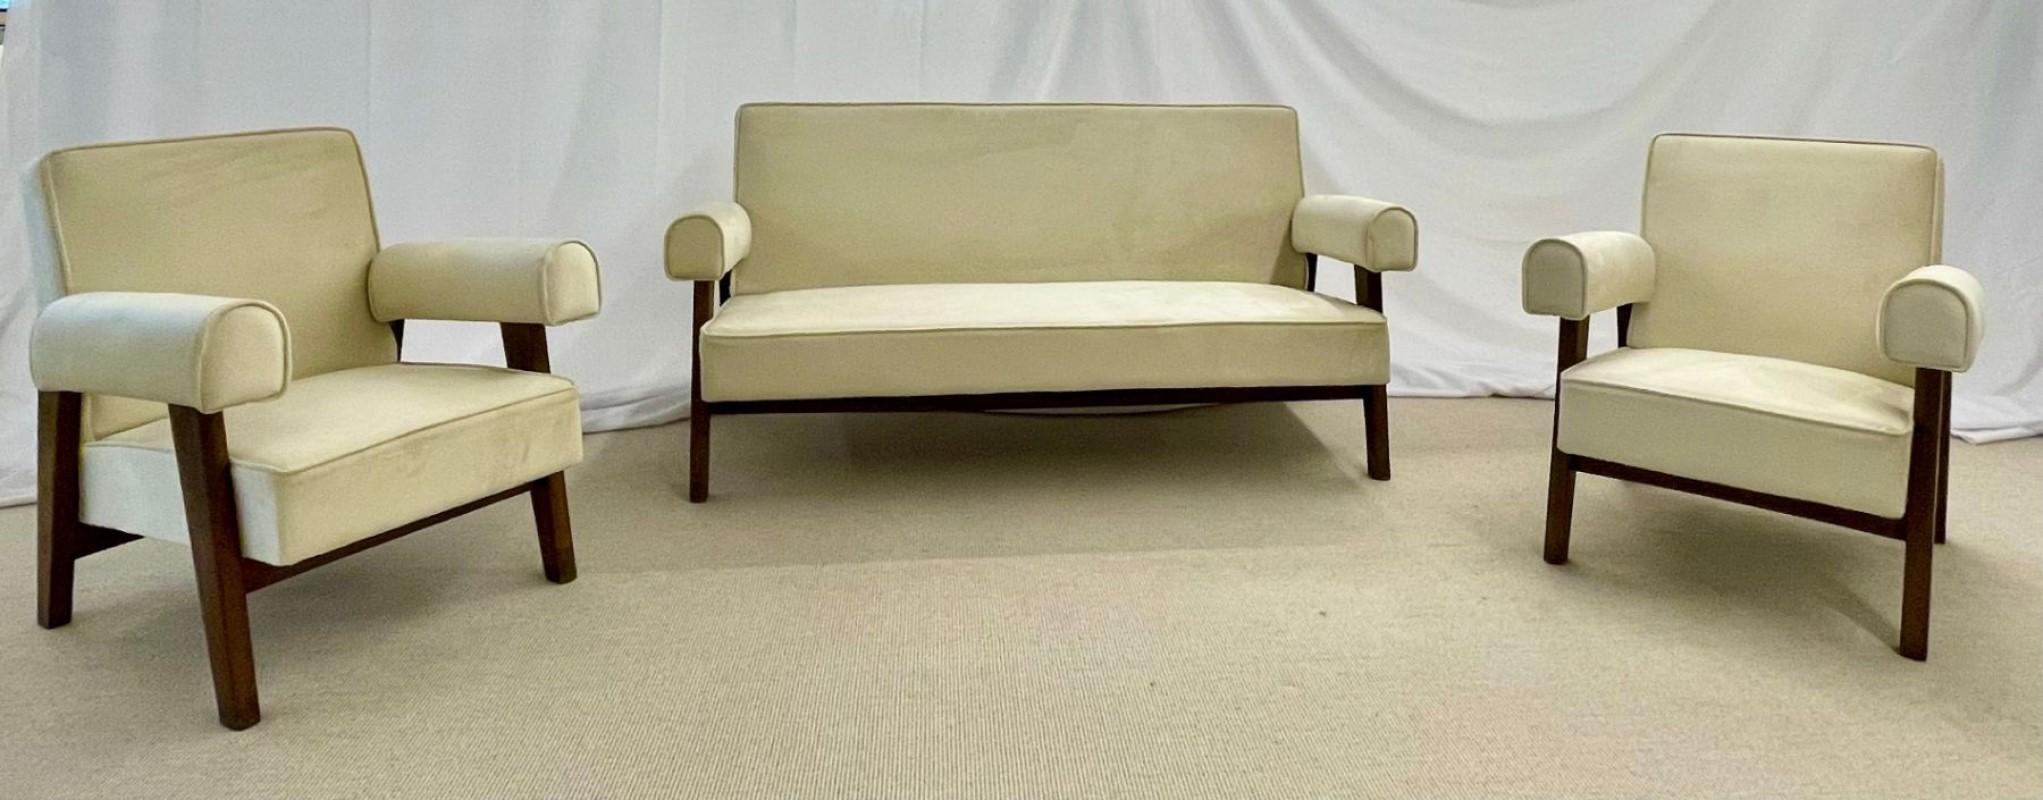 Pierre Jeanneret Attr., French Mid-Century Modern, Bridge Sofa Set, Chandigarh

Upholstered bridge sofa/chair set, Mid-Century Modern, Model PJ-SI-42-B and PJ-SI-42-A attributed to Pierre Jeanneret with special markings on the back of the sofa. This